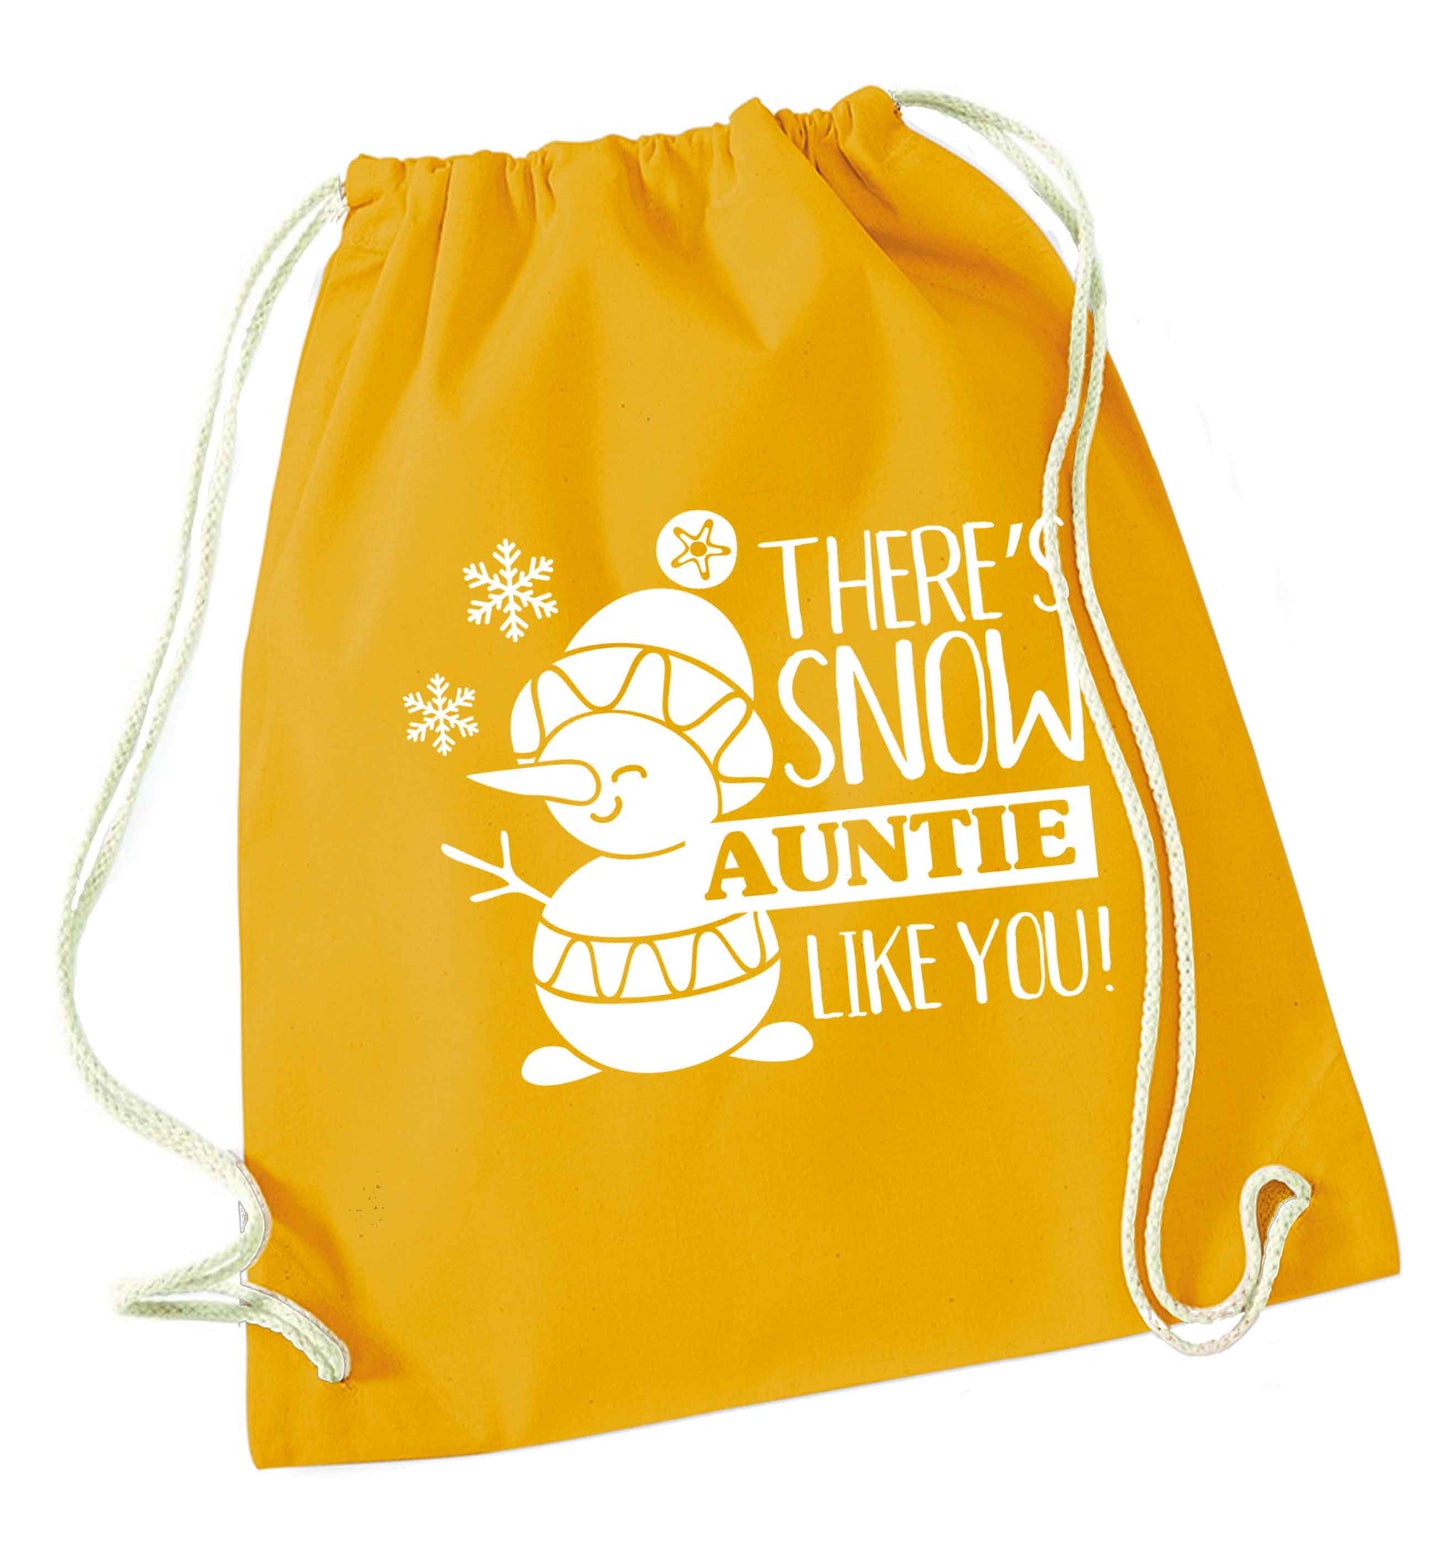 There's snow auntie like you mustard drawstring bag